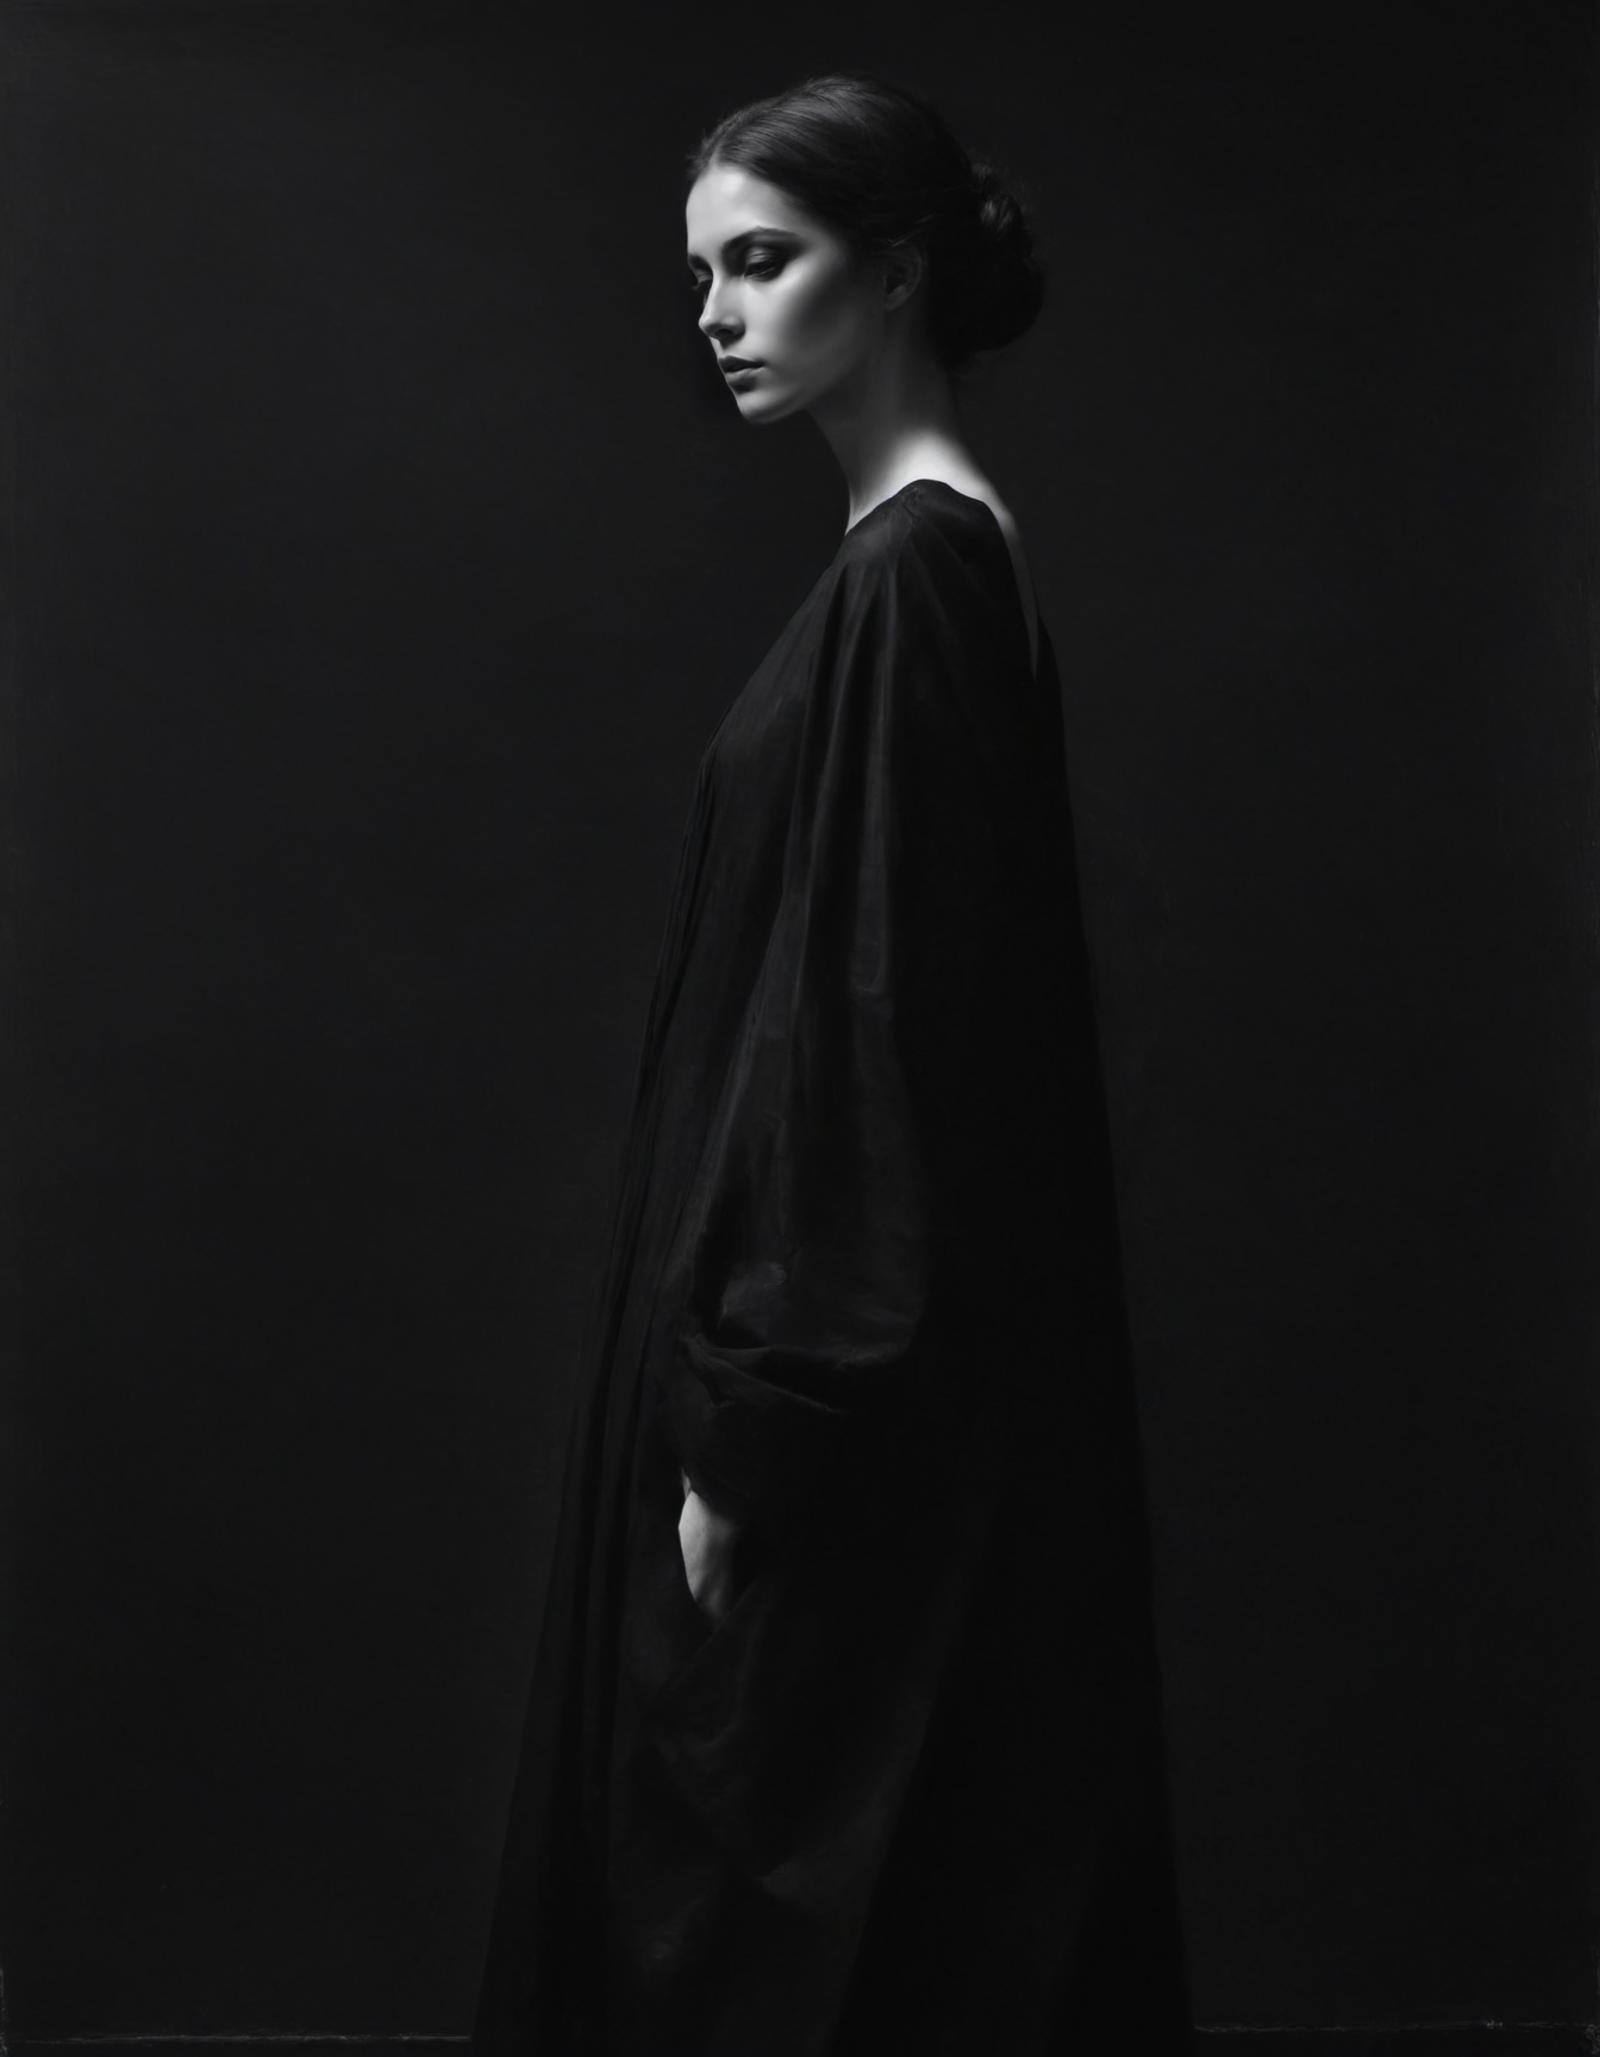 A woman dressed in a black robe with her hair in a bun, standing in a dark room.